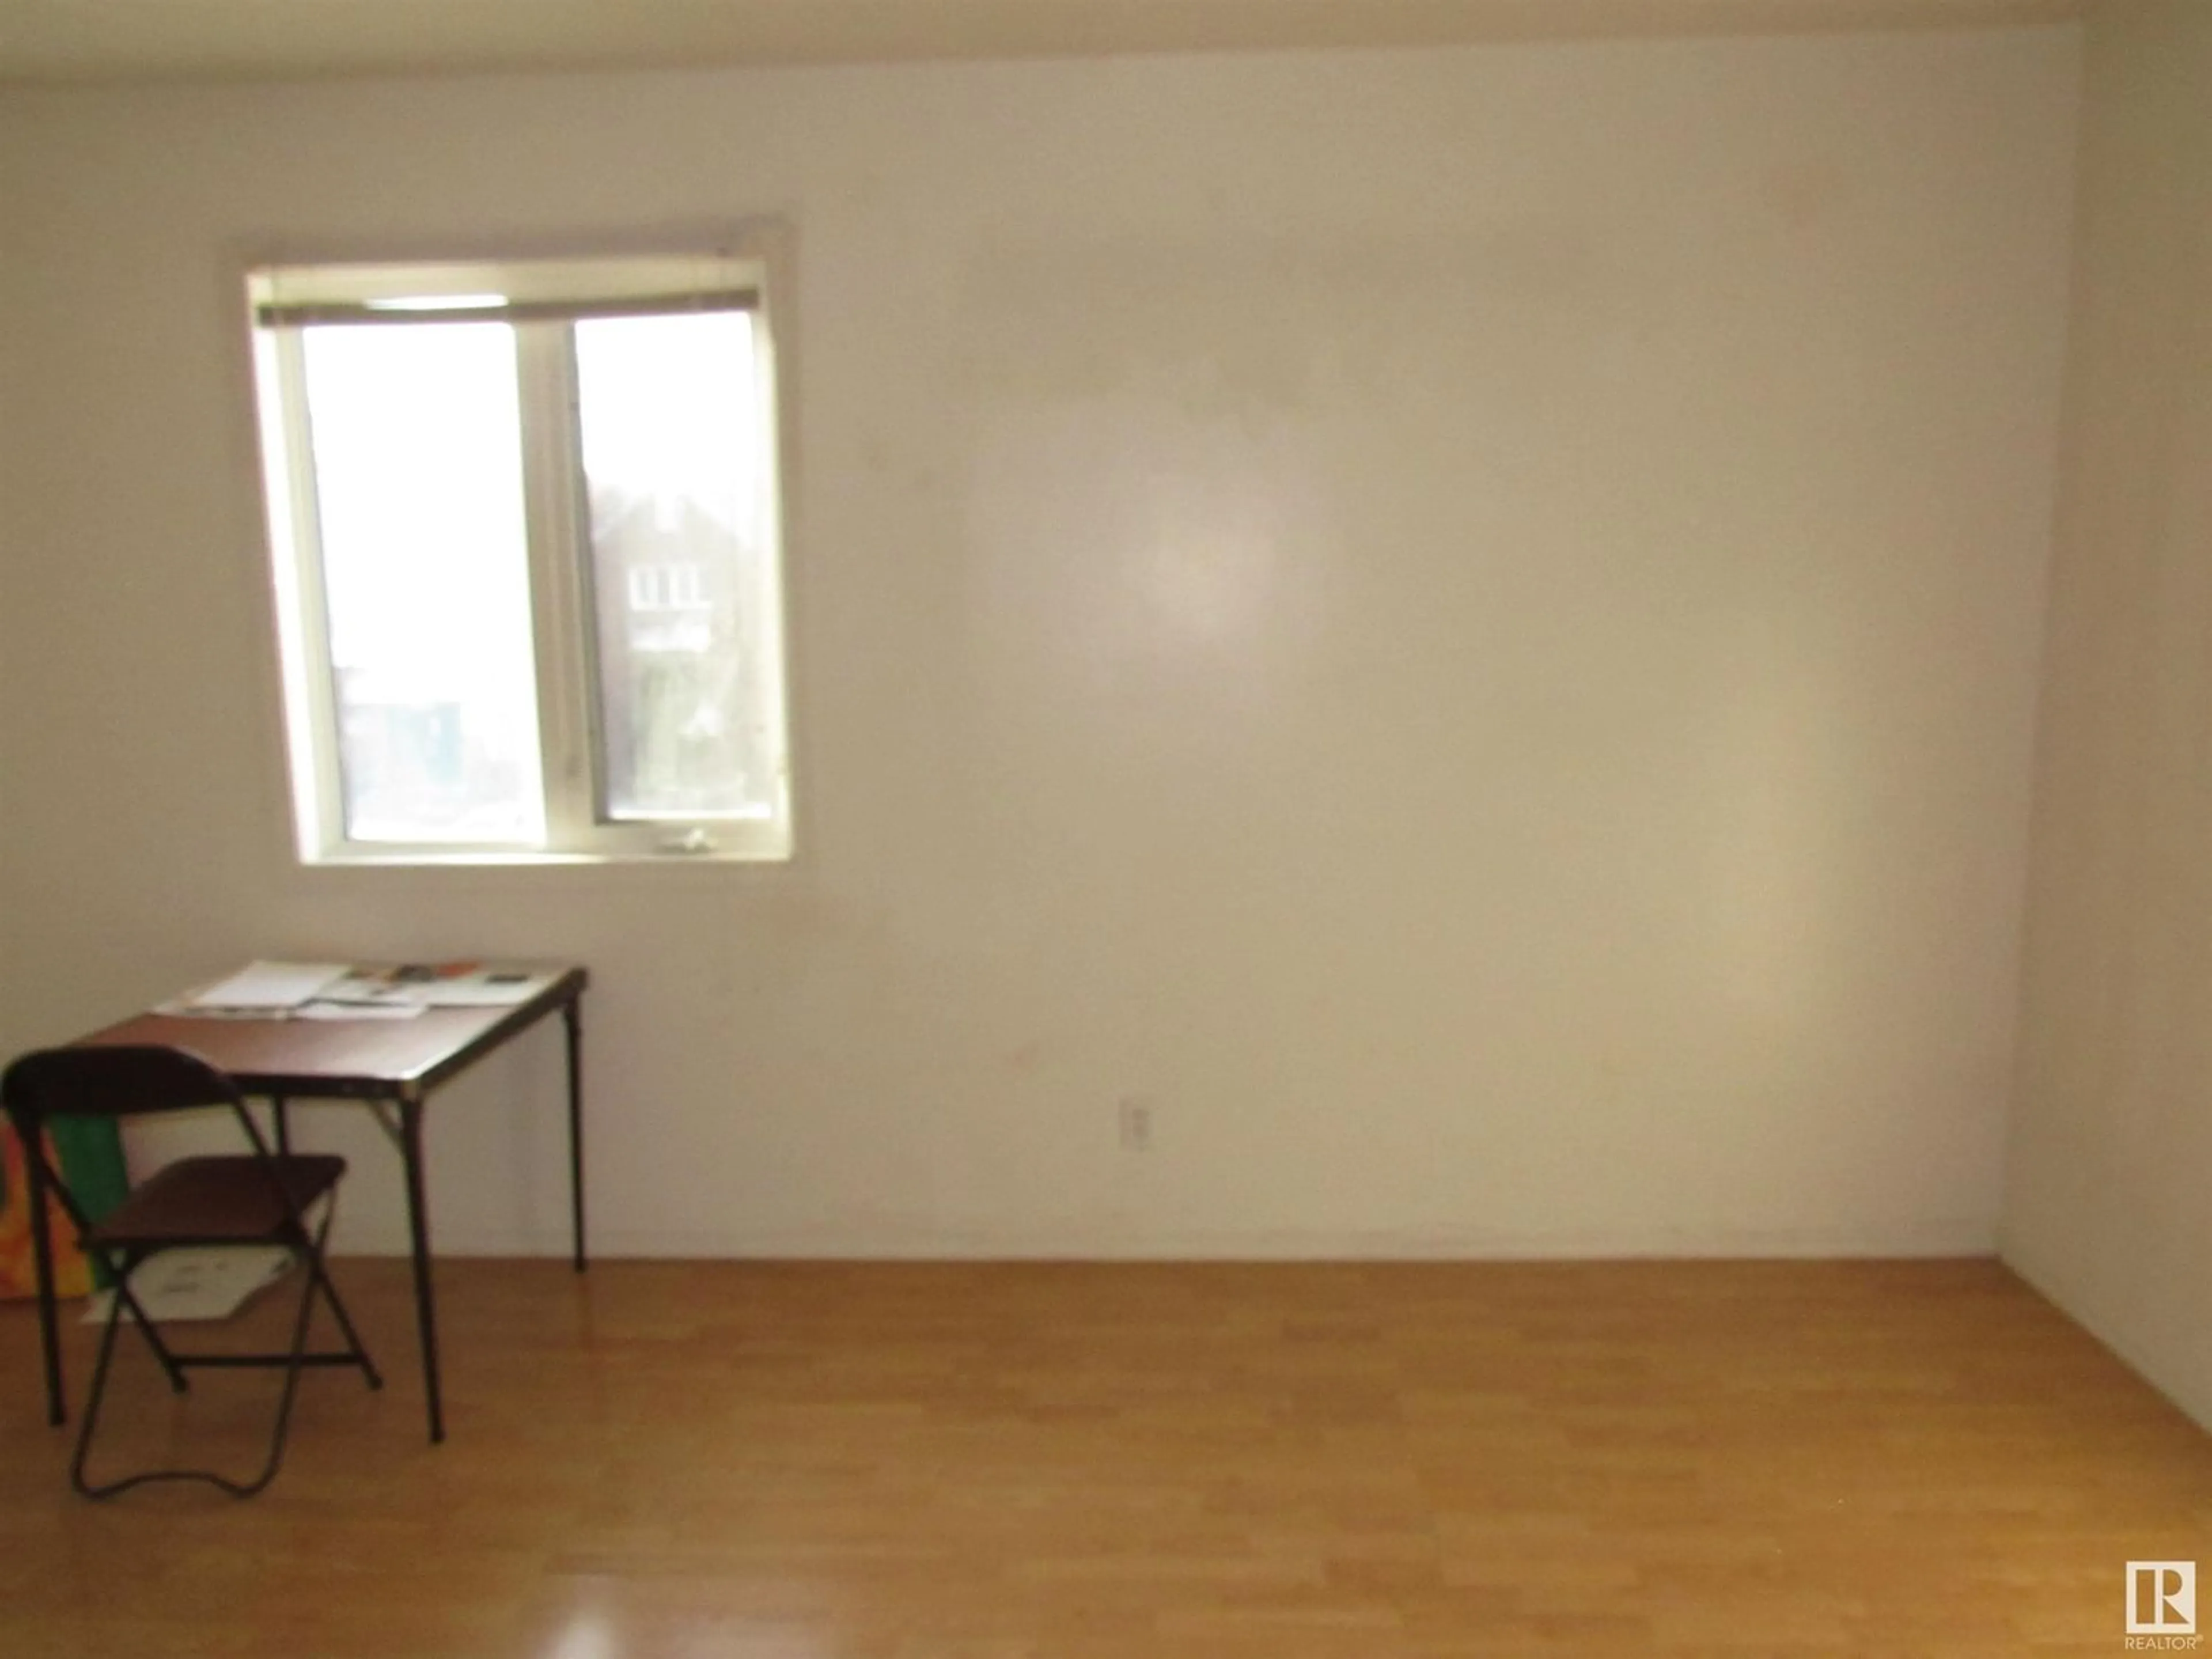 A pic of a room for 11015 96 ST NW, Edmonton Alberta T5H2K7